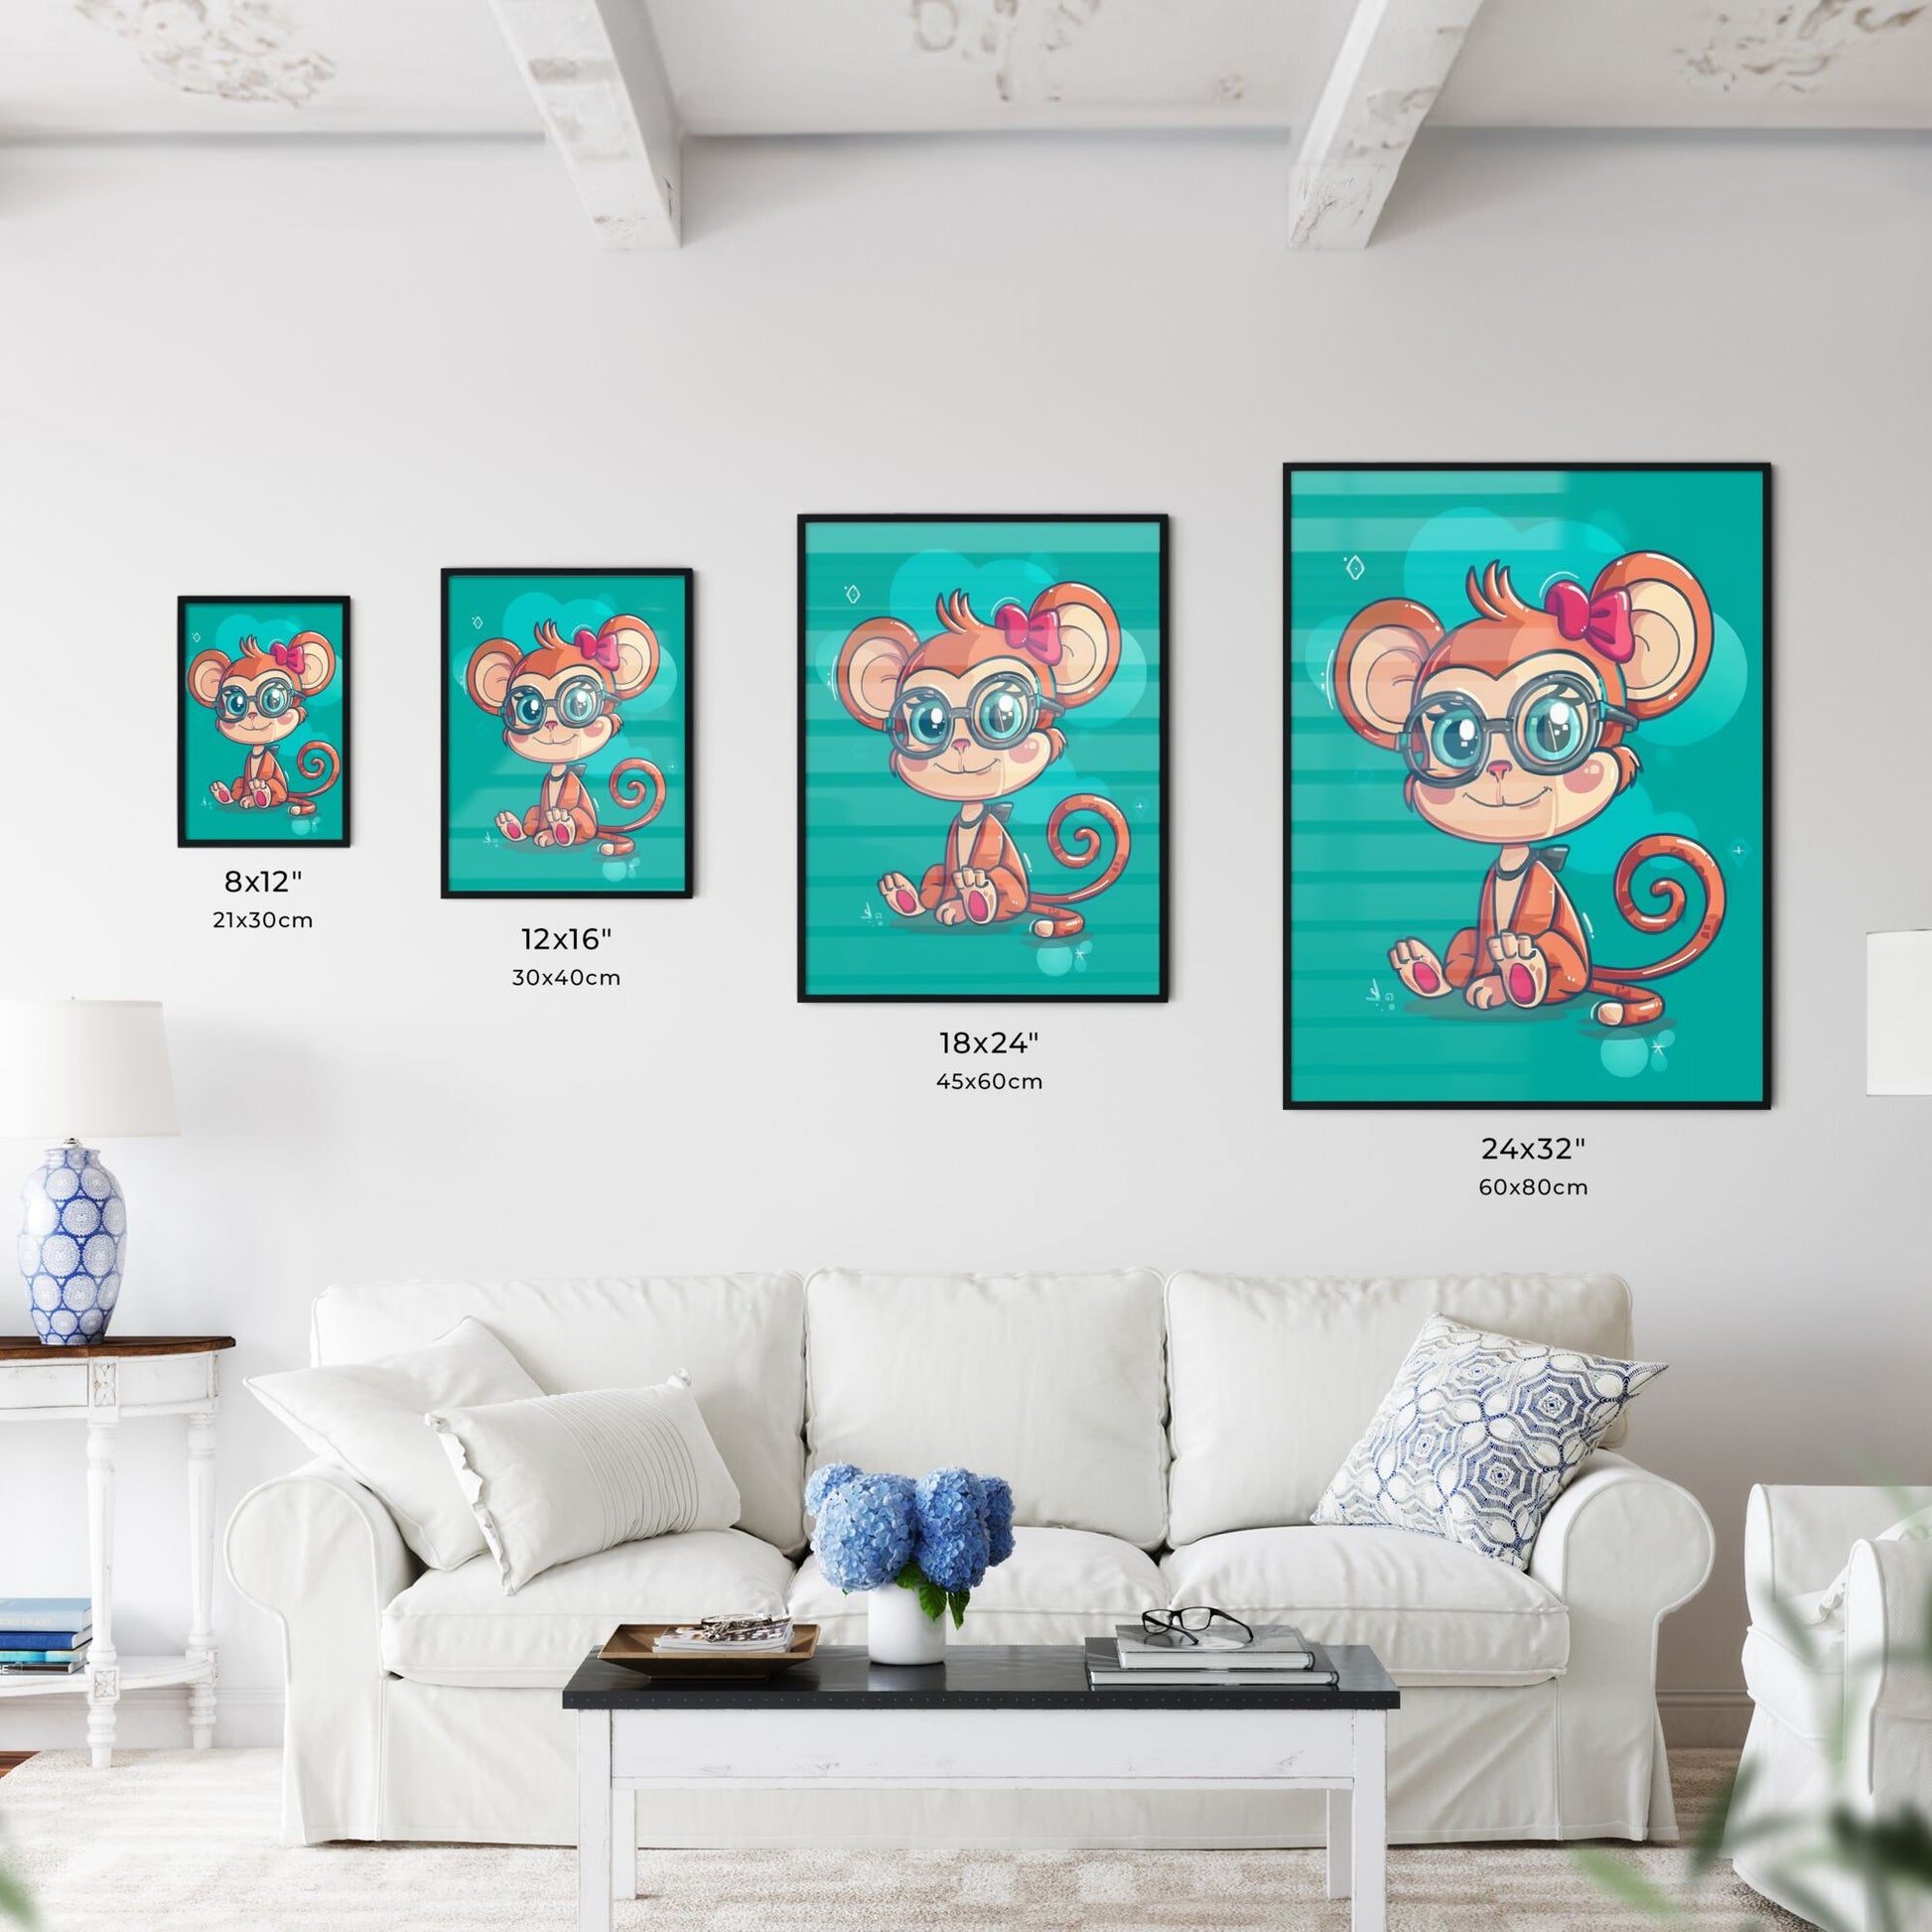 Colorful Kawaii Style Monkey Graphic: Vibrant Painting with Clear Outline and Cartoon Character Wearing Glasses and Bow Tie Default Title